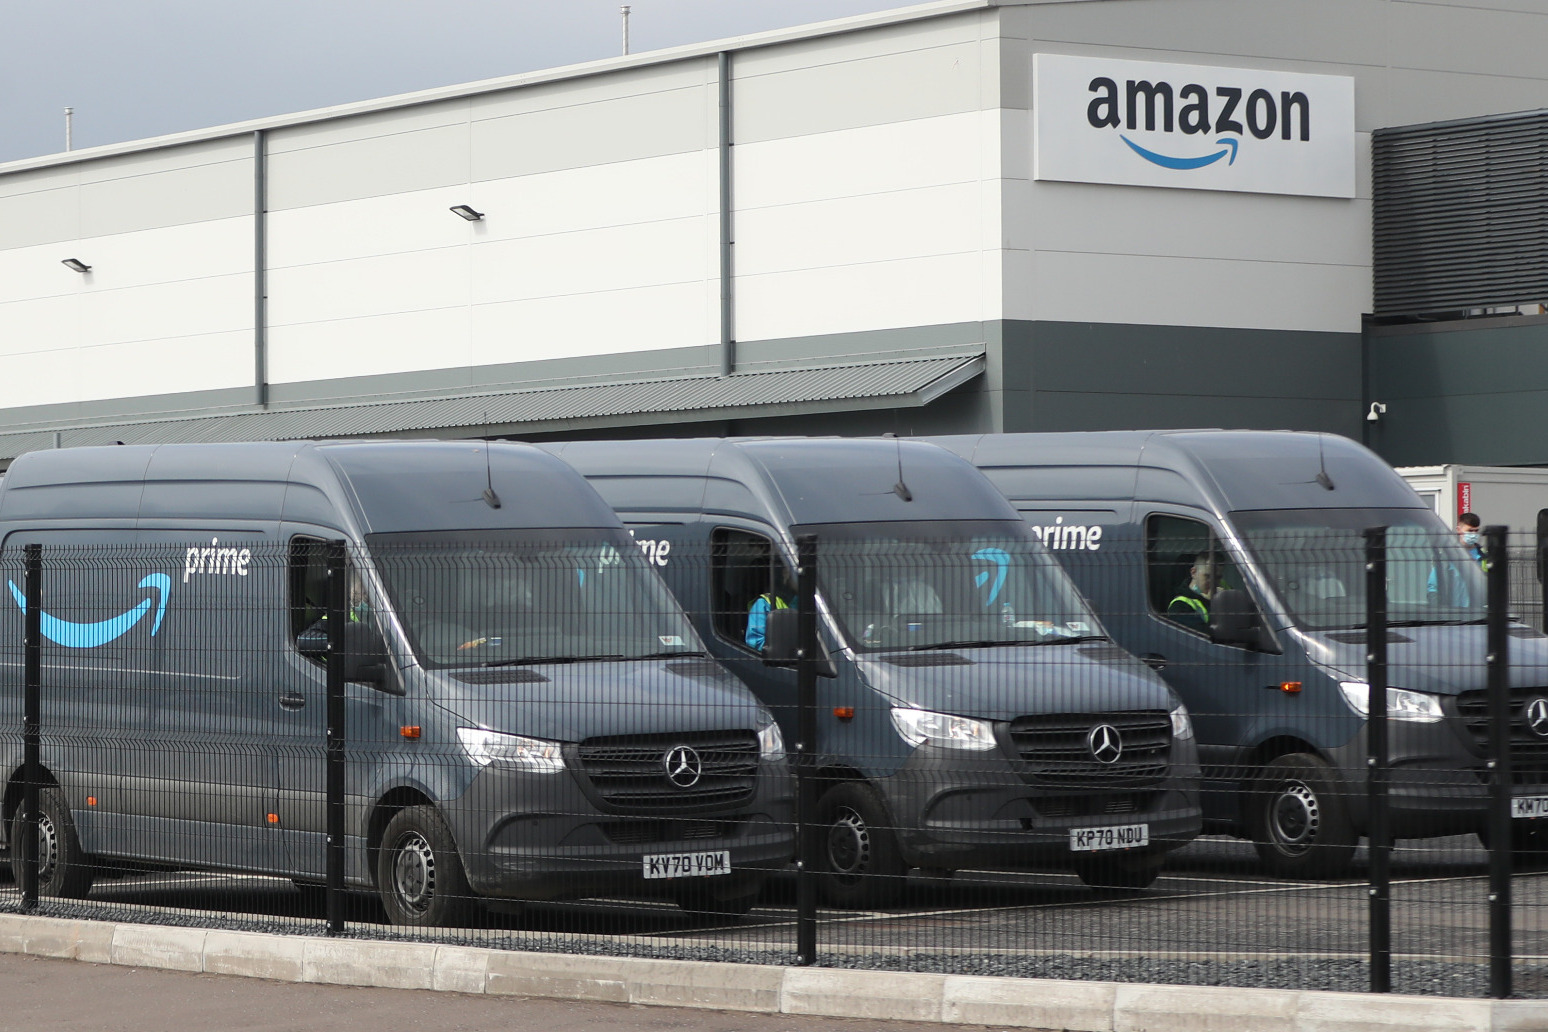 Amazon announces pay rise for UK staff of at least £1 an hour 